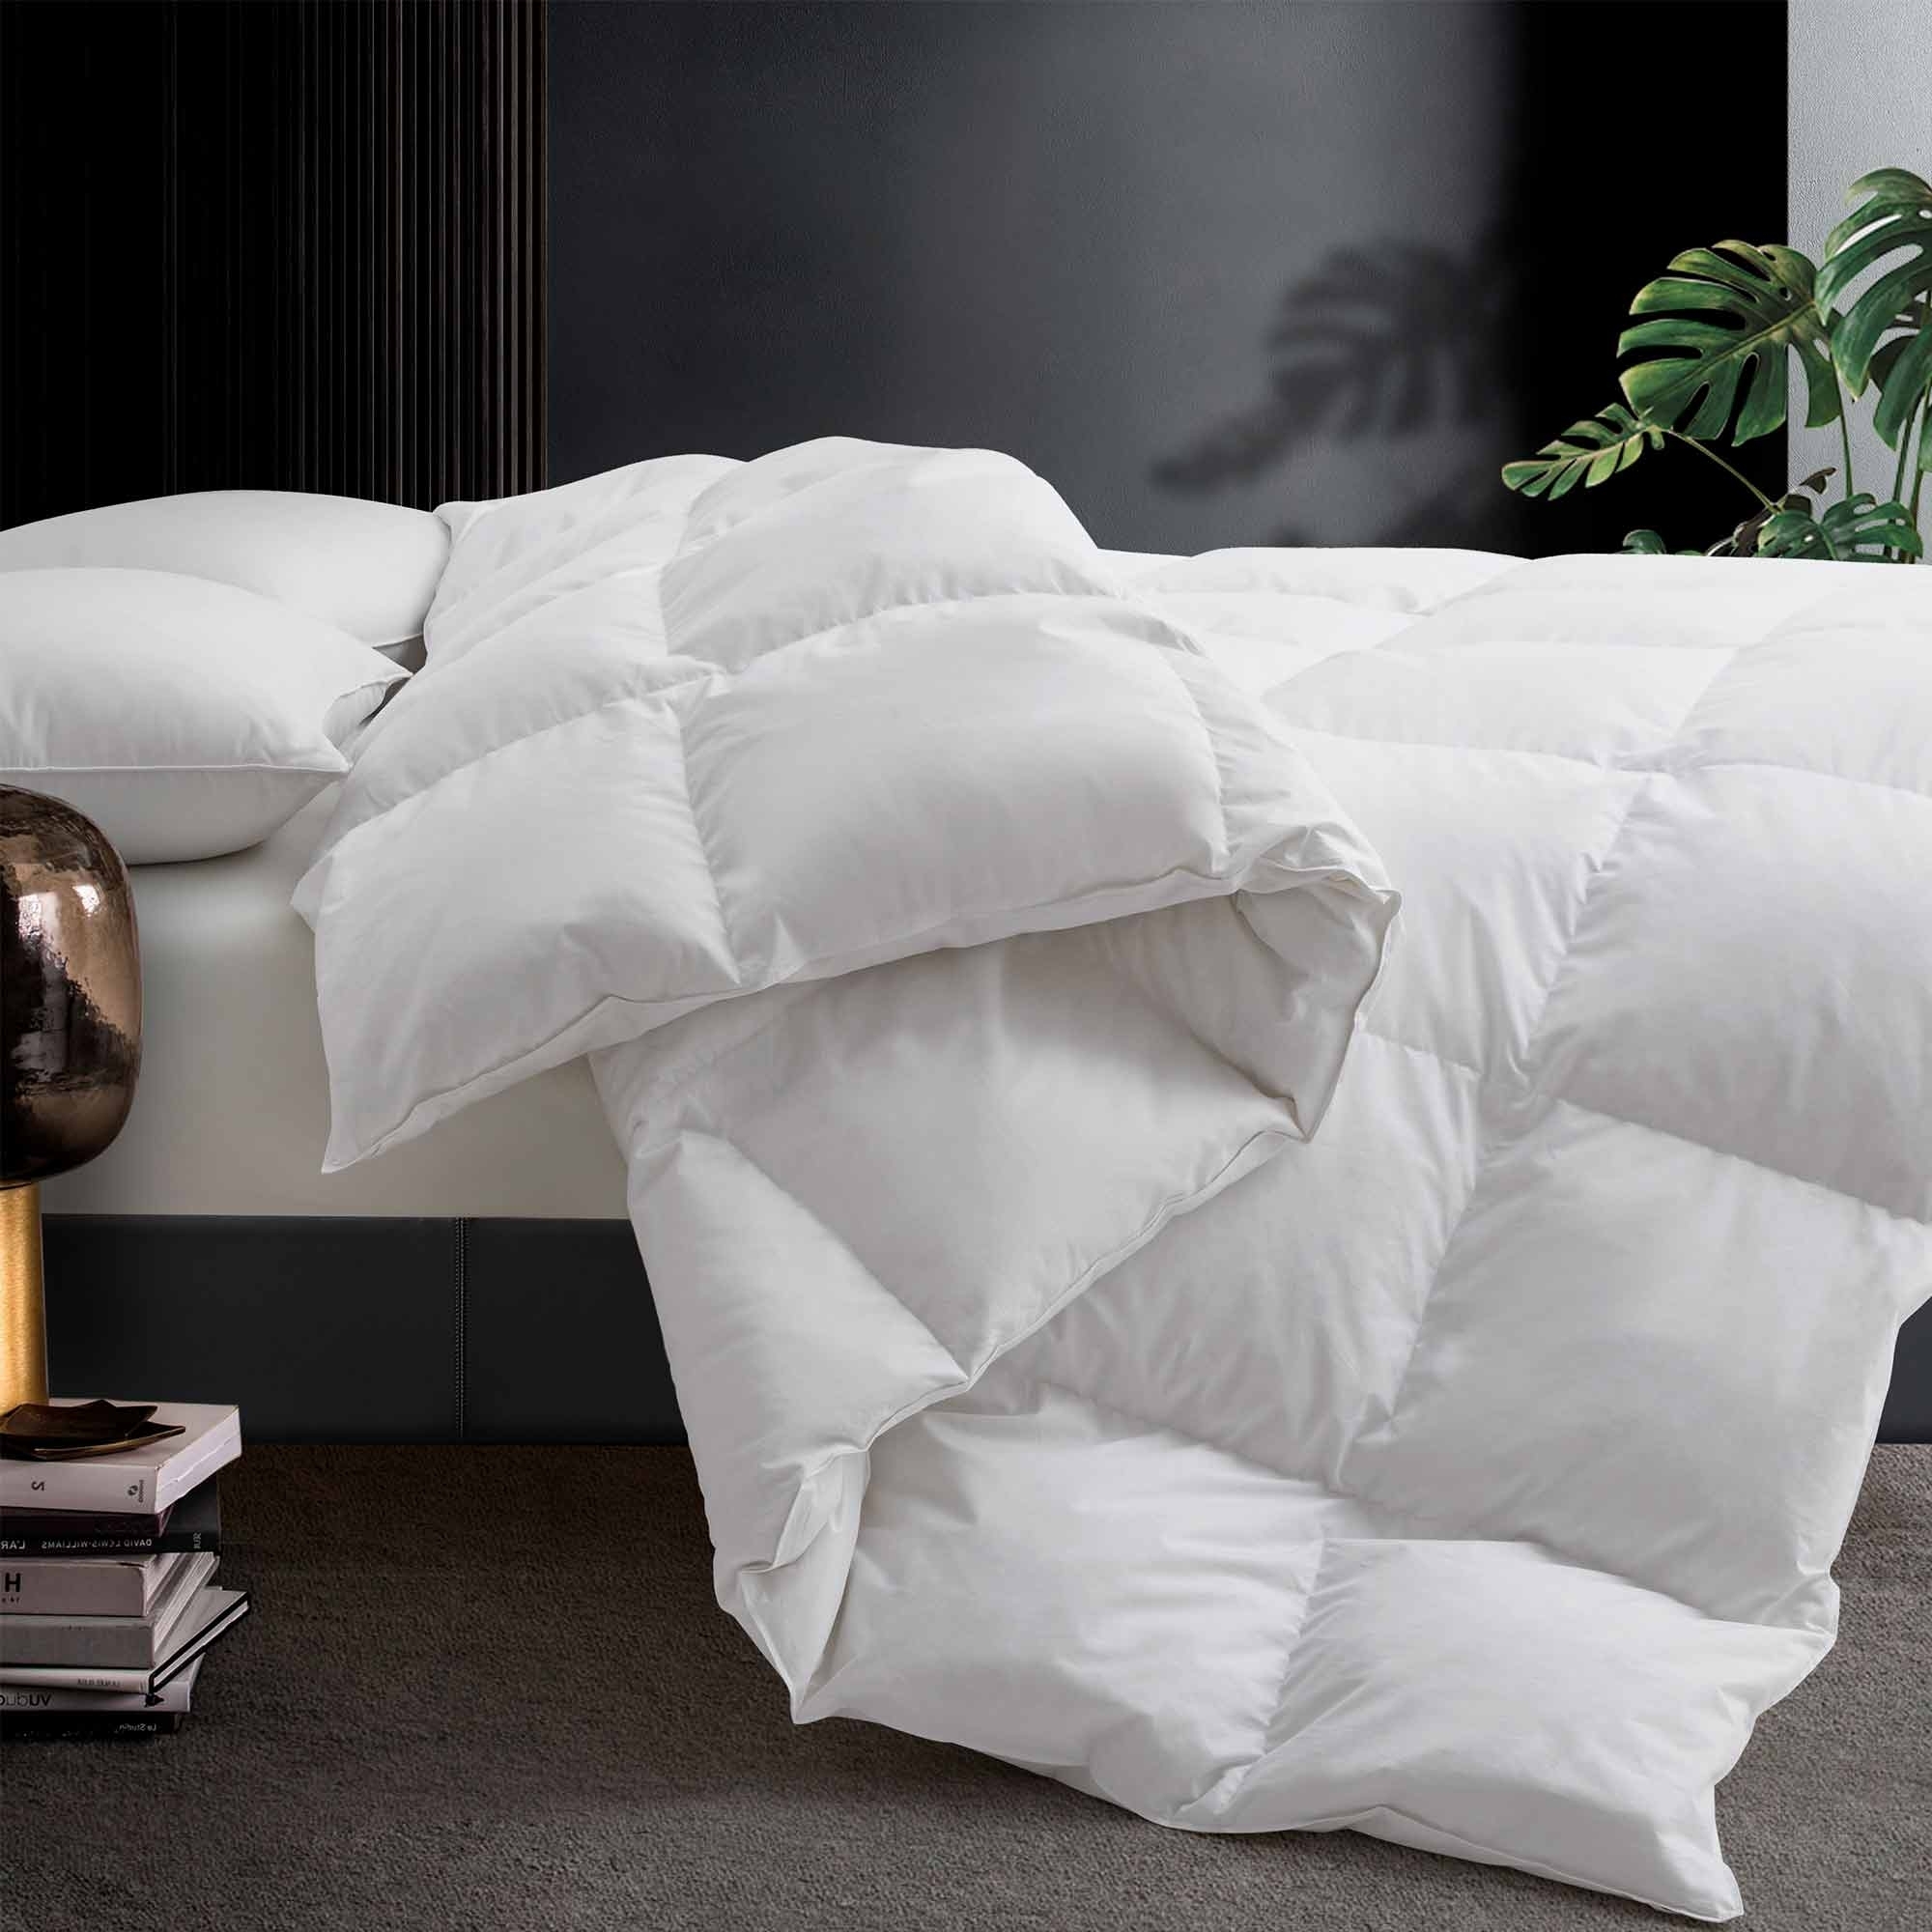 White Goose Feather And Down Comforters, Lightweight And Medium Weight Duvet Insert - Medium Weight, King